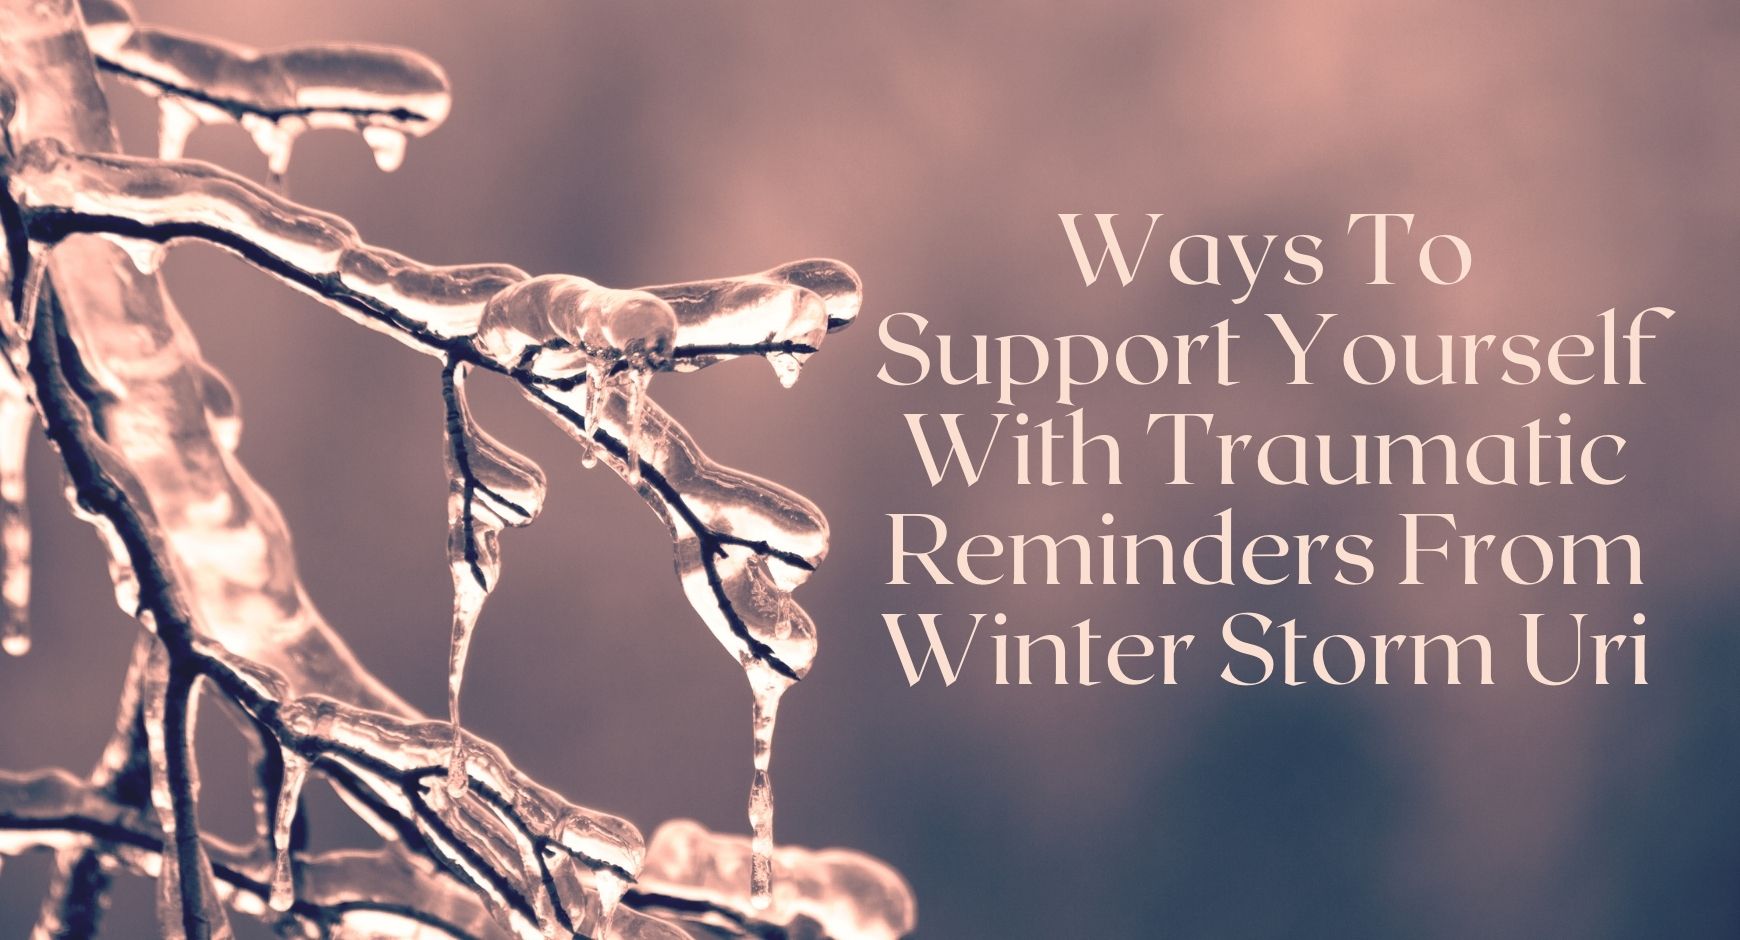 A frozen tree branch next to words that read "Ways To Support Yourself With Traumatic Reminders From Winter Storm Uri"